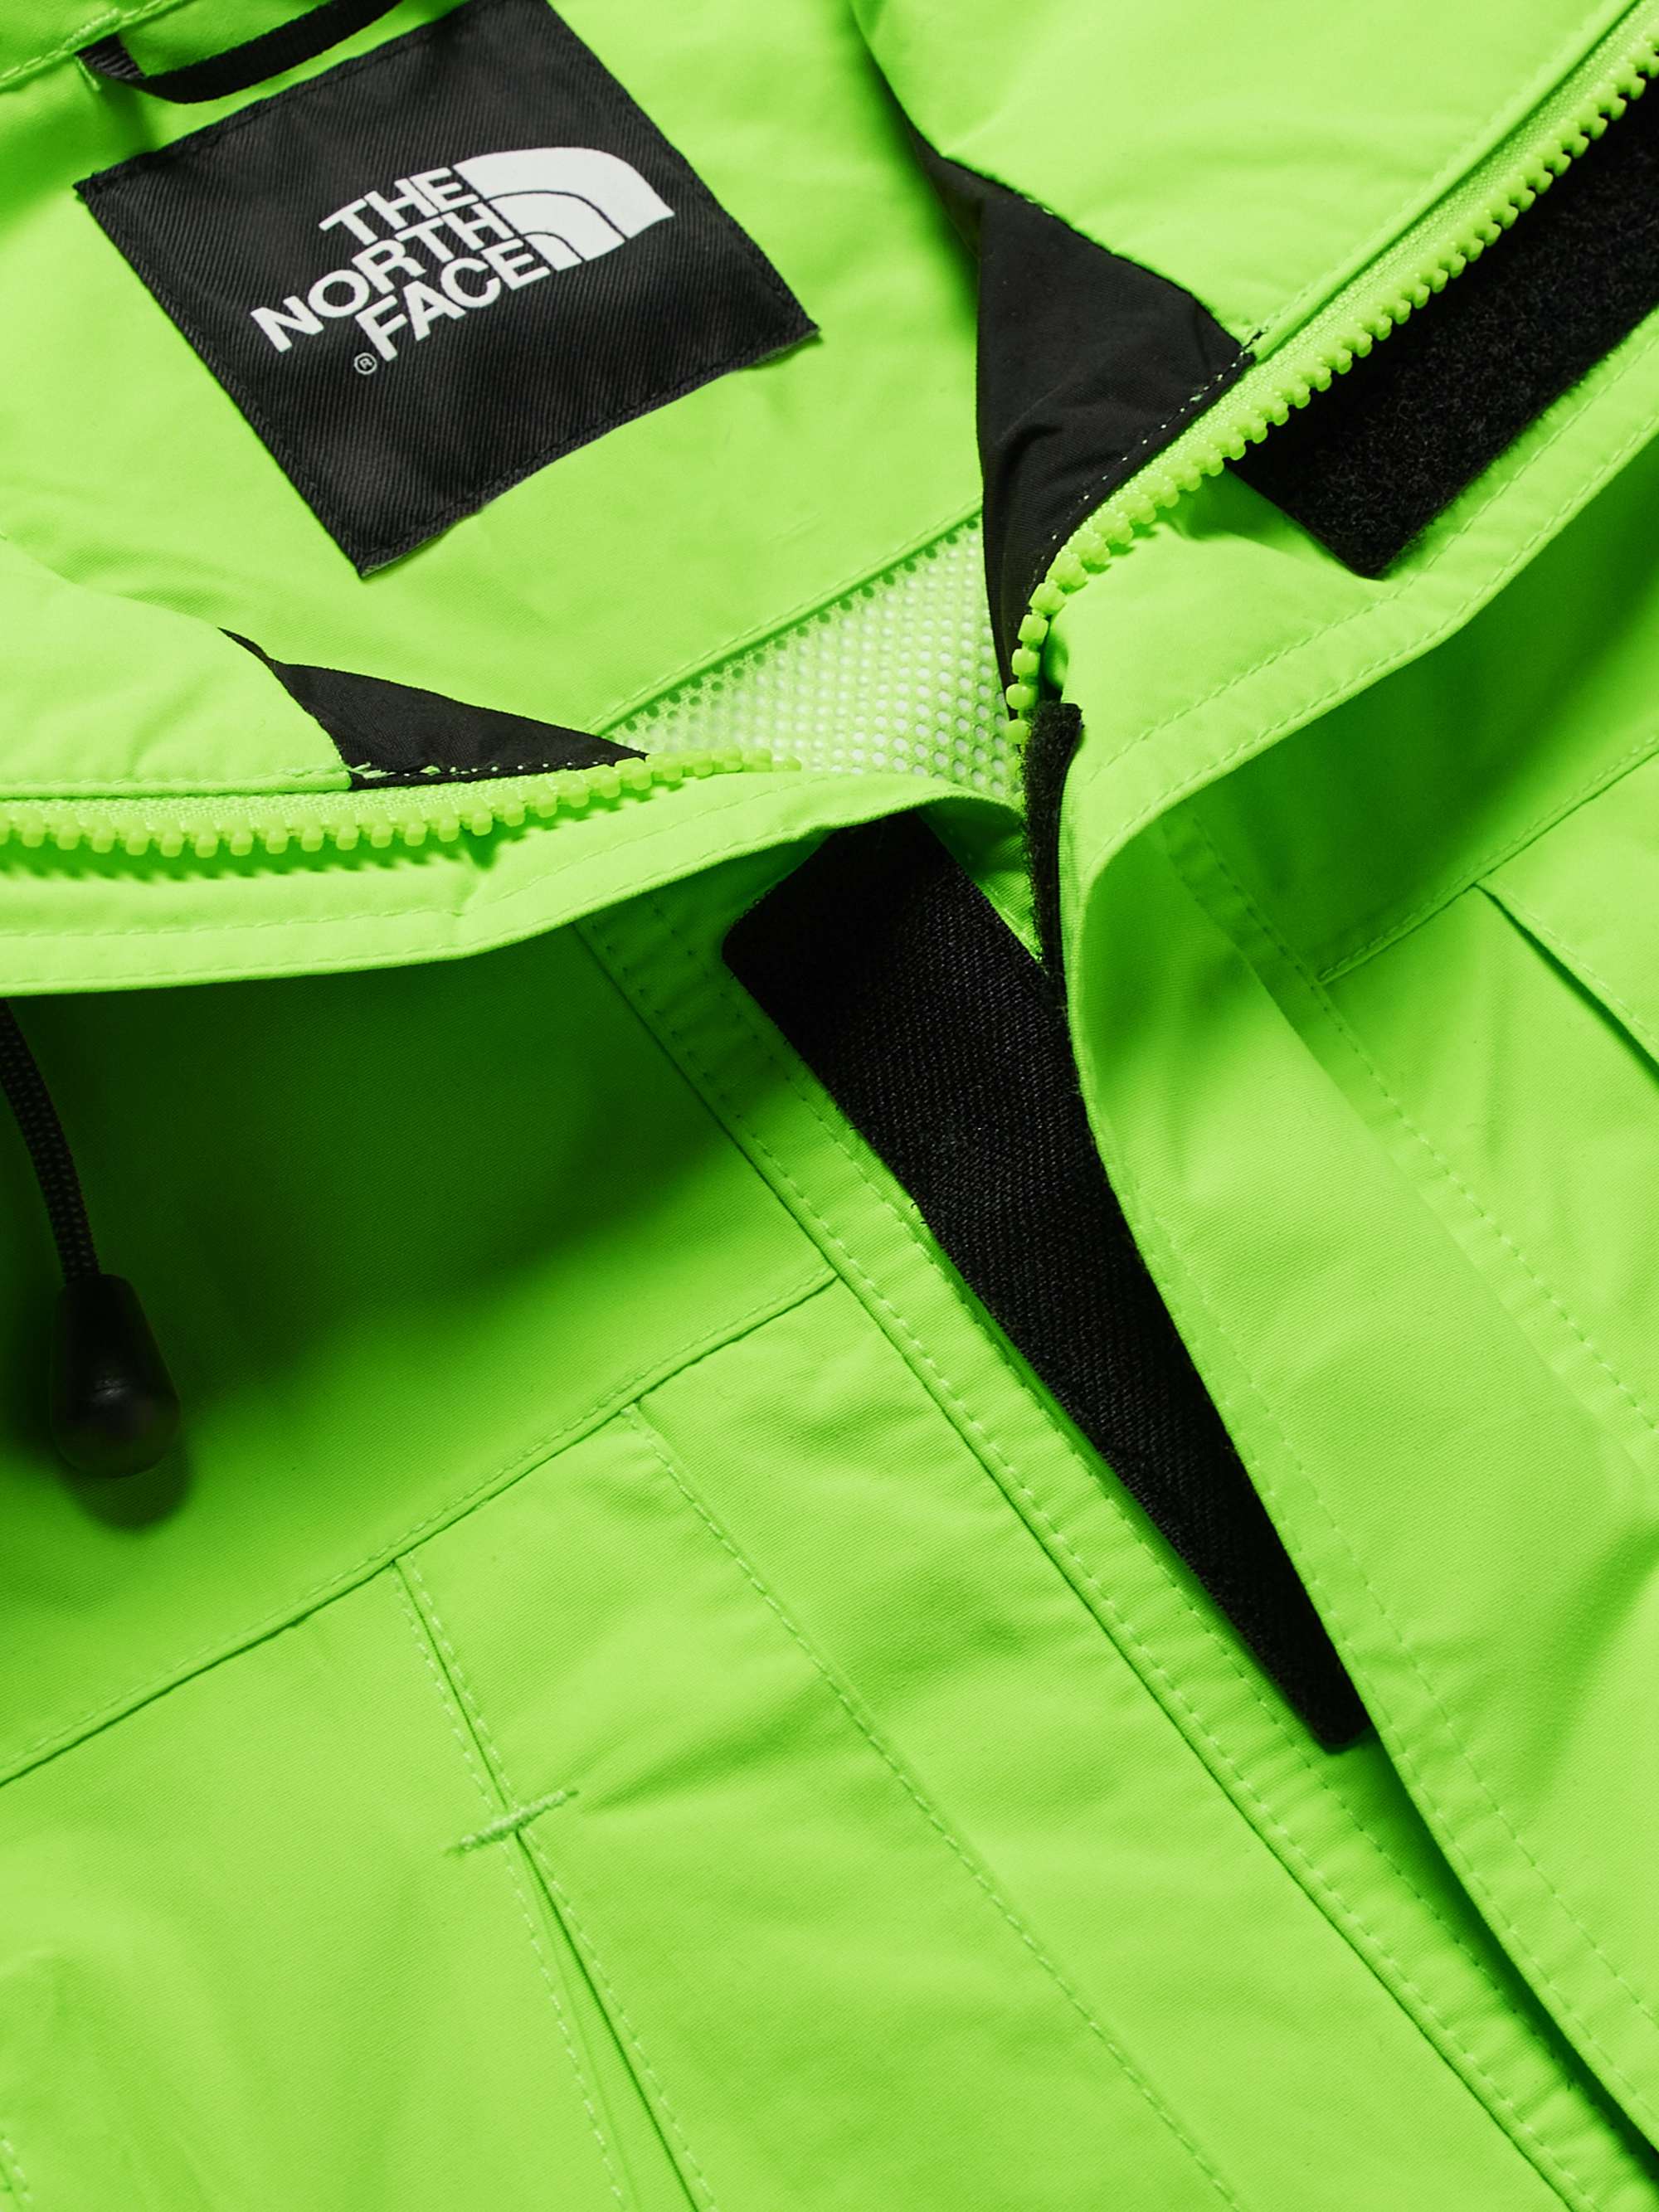 THE NORTH FACE Phlego Colour-Block DryVent Hooded Jacket